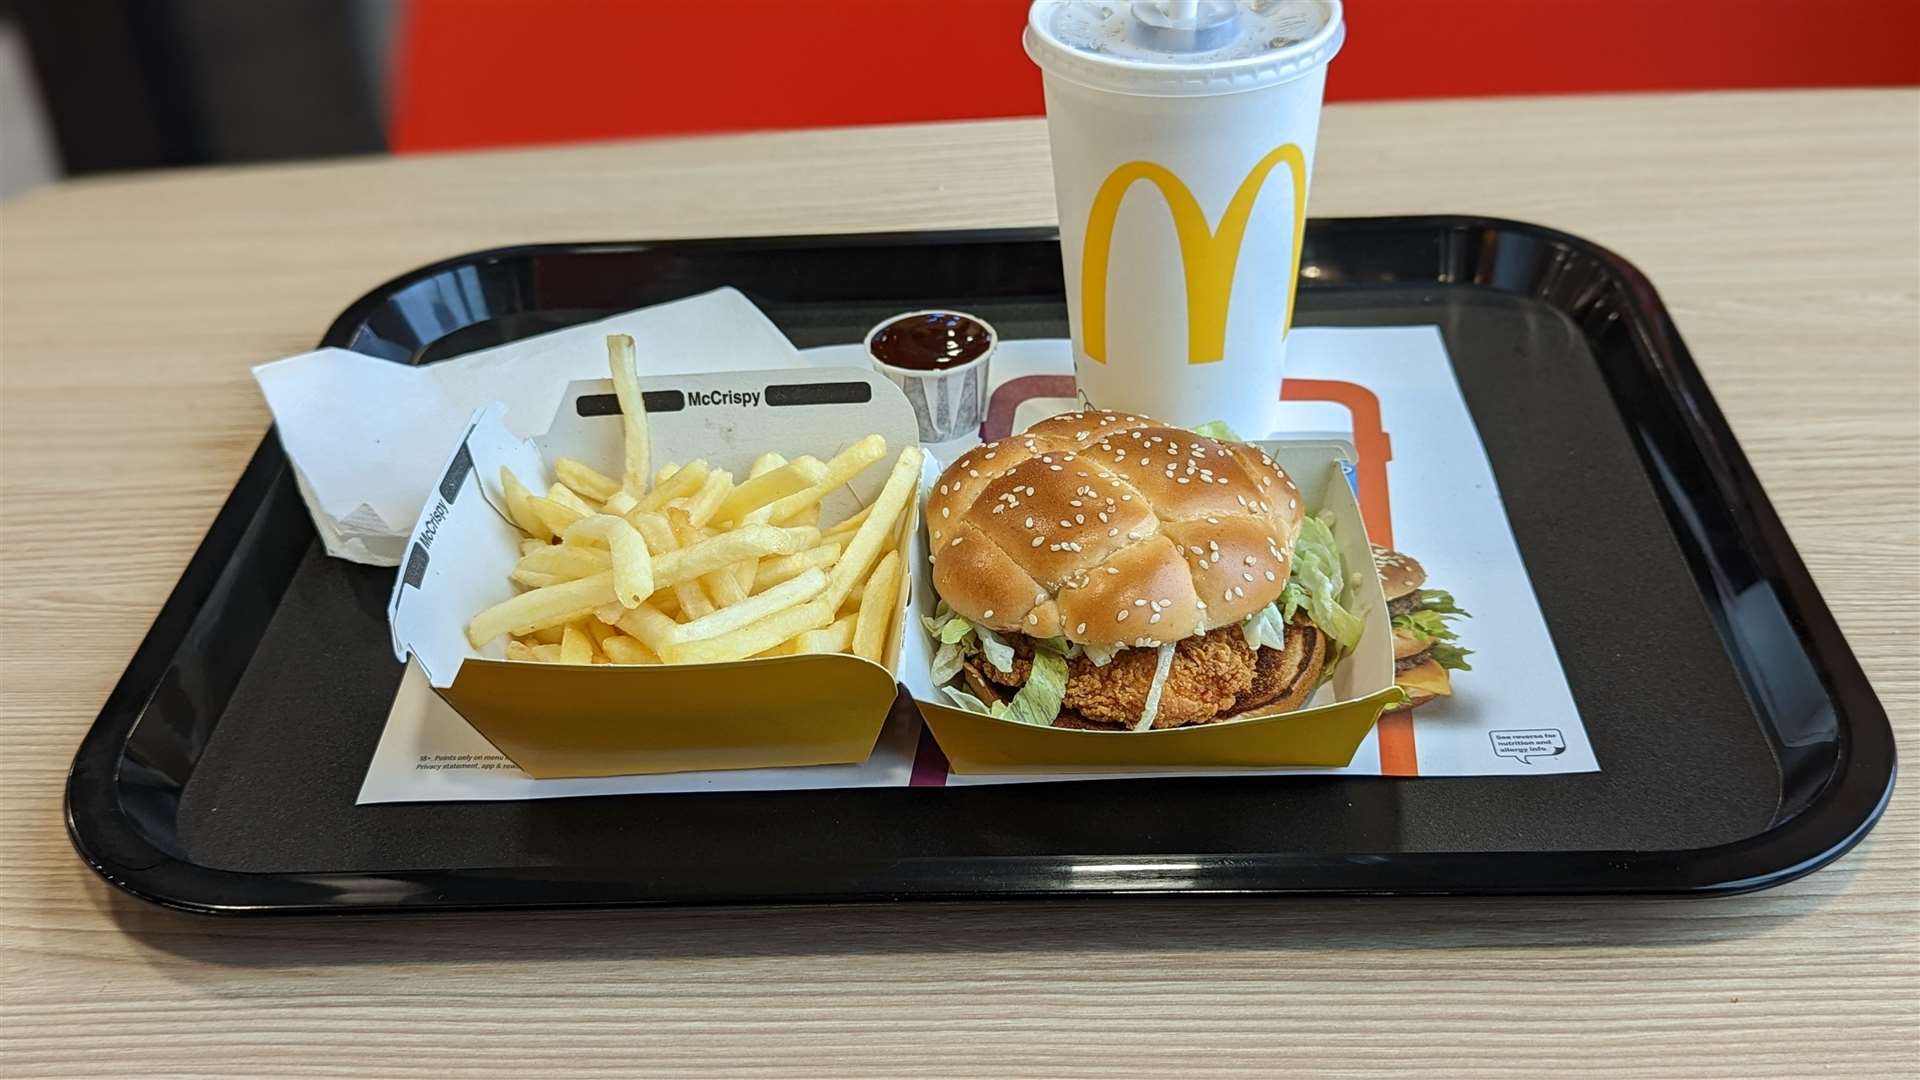 McDonald's has been making changes to its packaging removing plastic straws and spoons and introducing more cardboard boxes